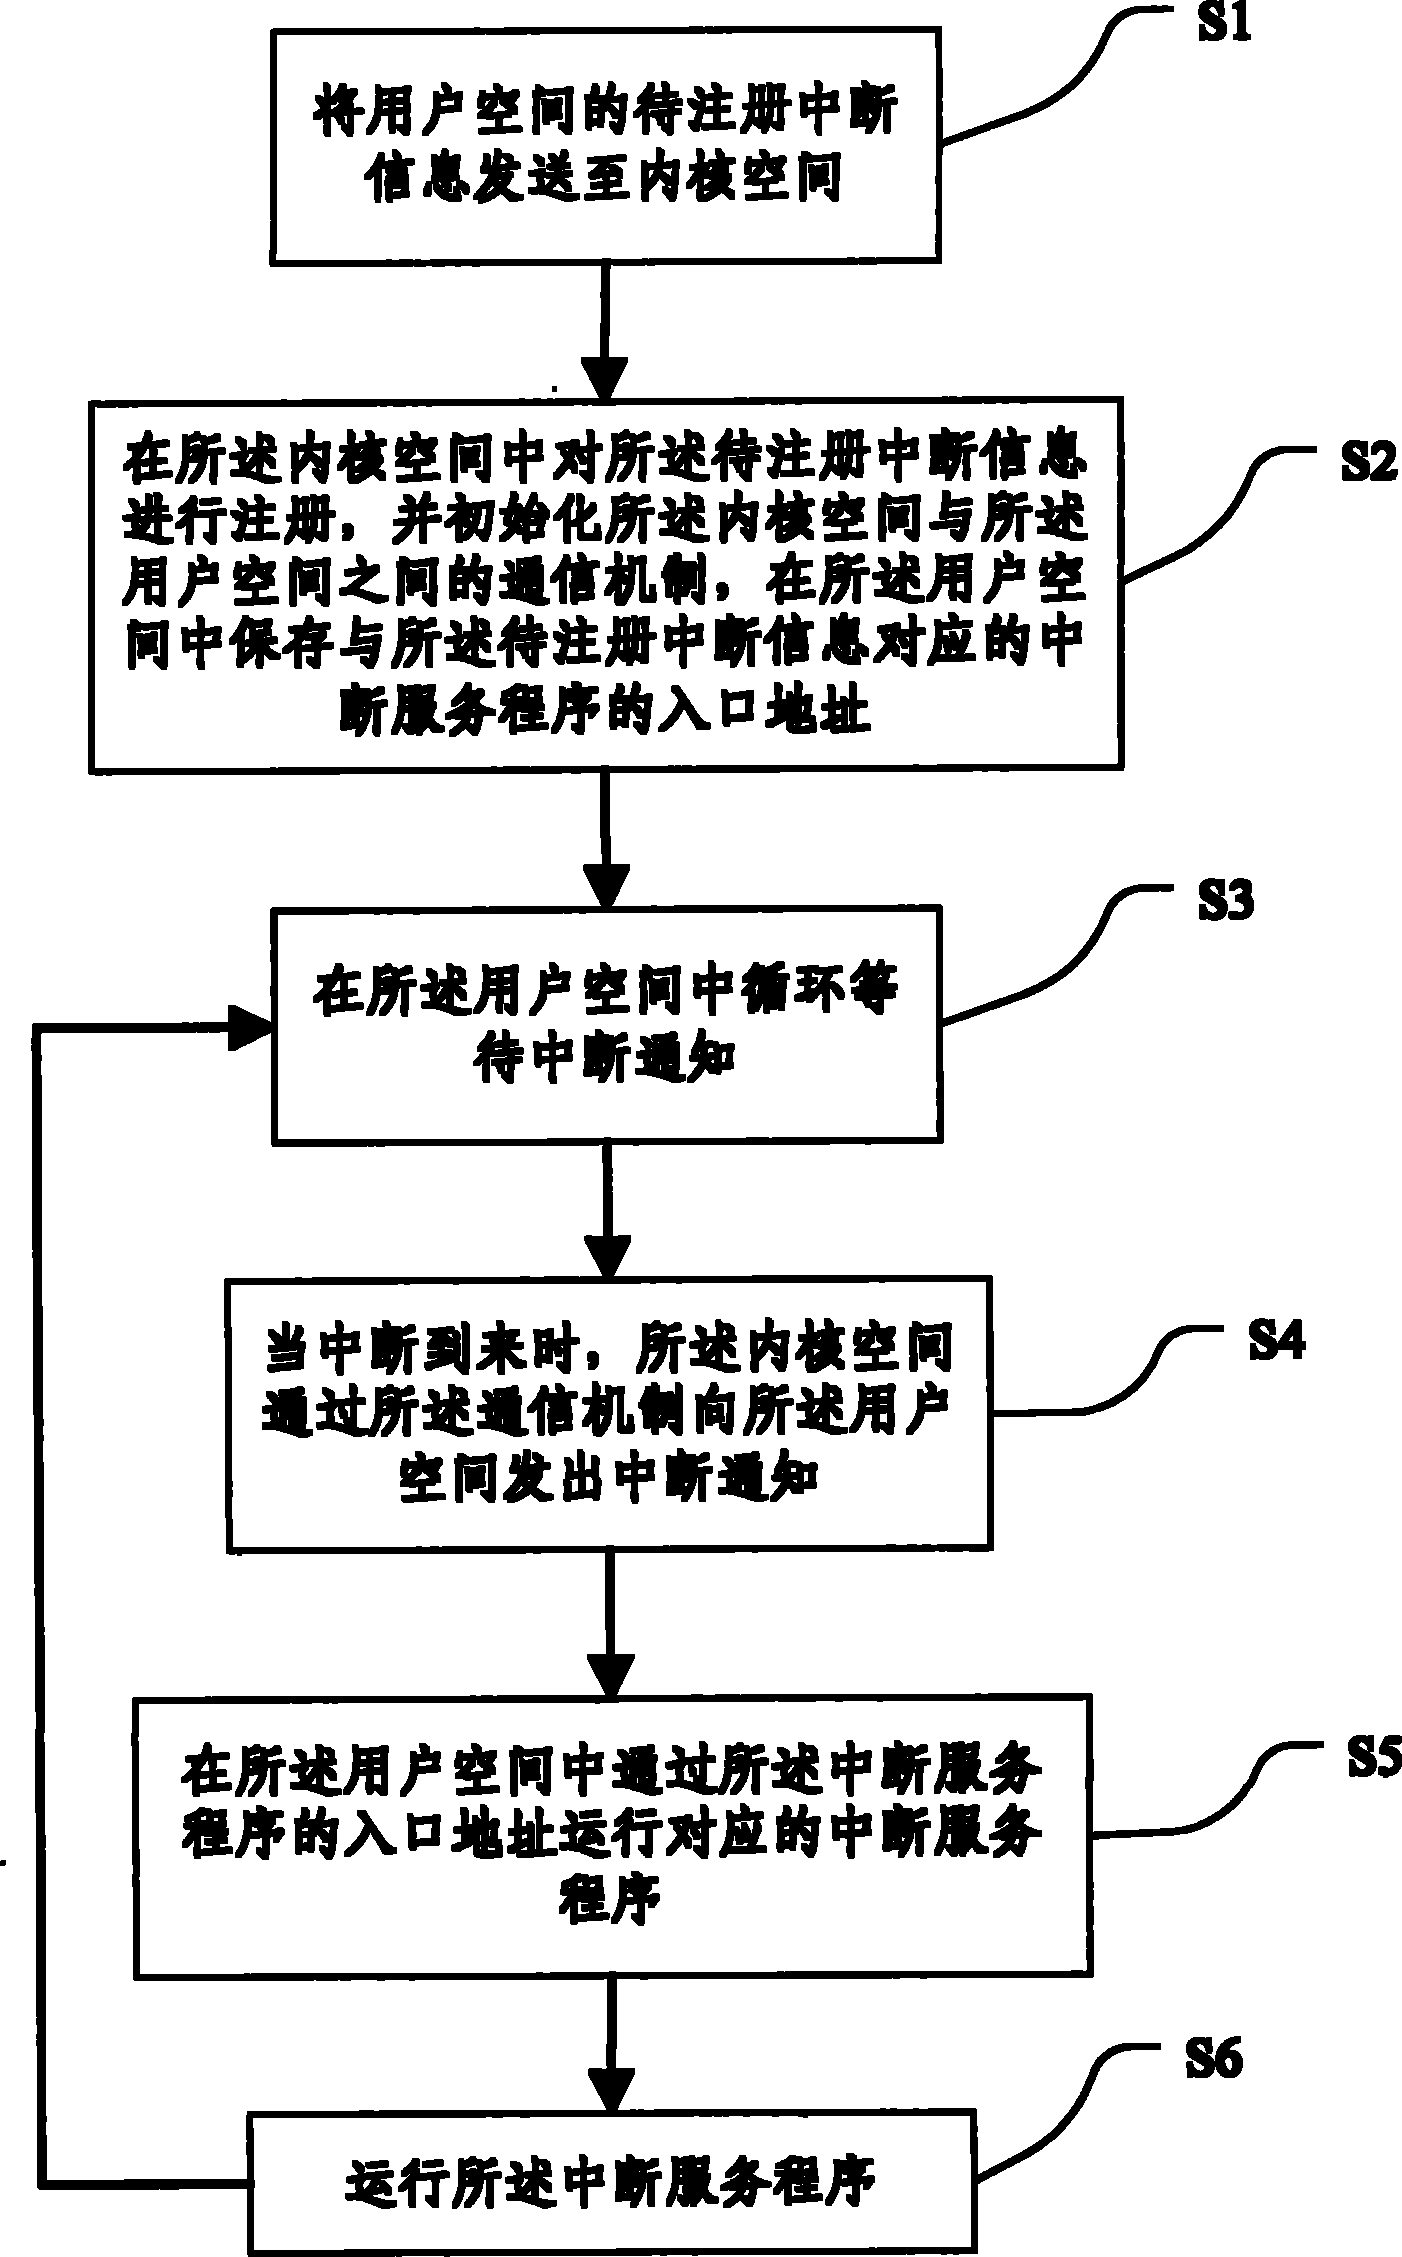 Method and system for running interrupt service in user space